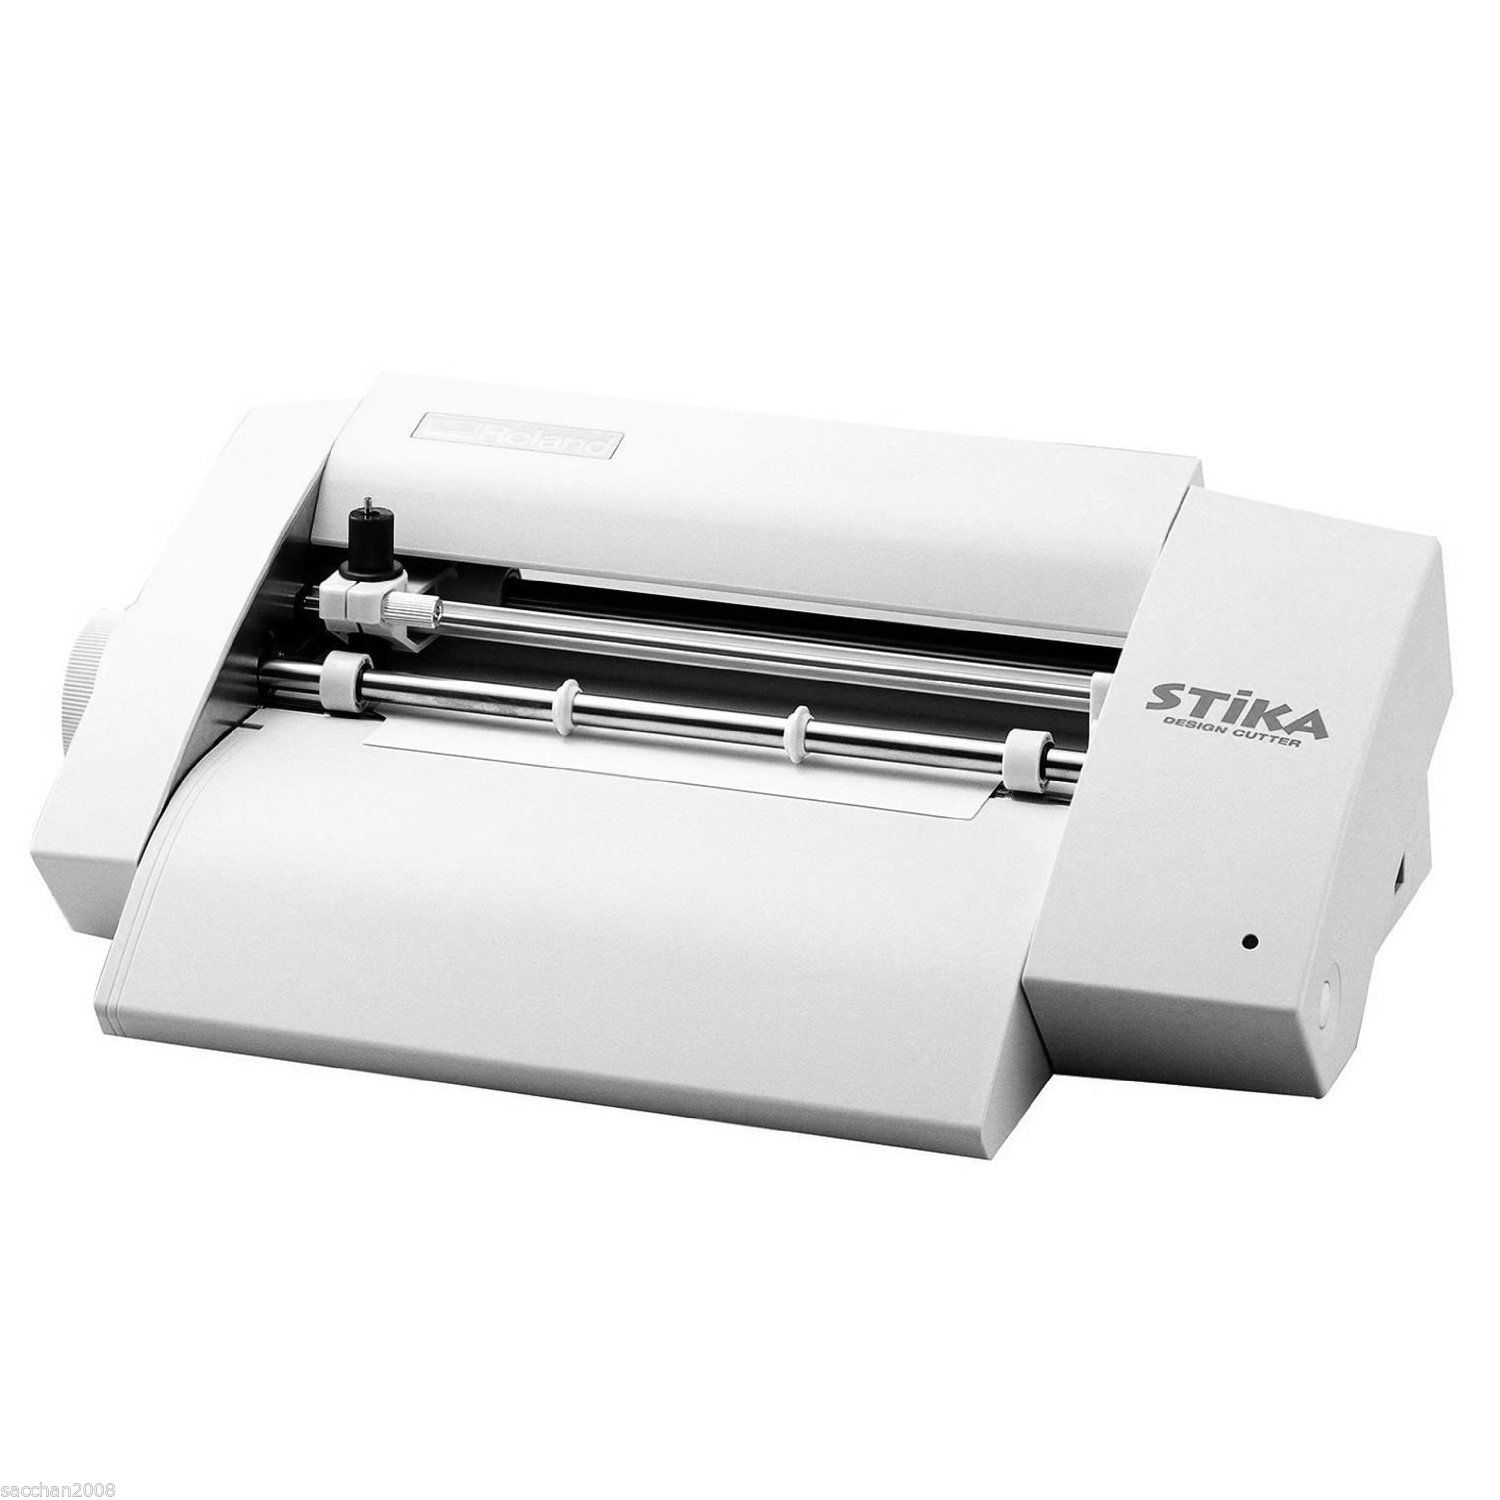 The Stika SV-15 from Roland is a small, white machine that can easily fit on a desk.